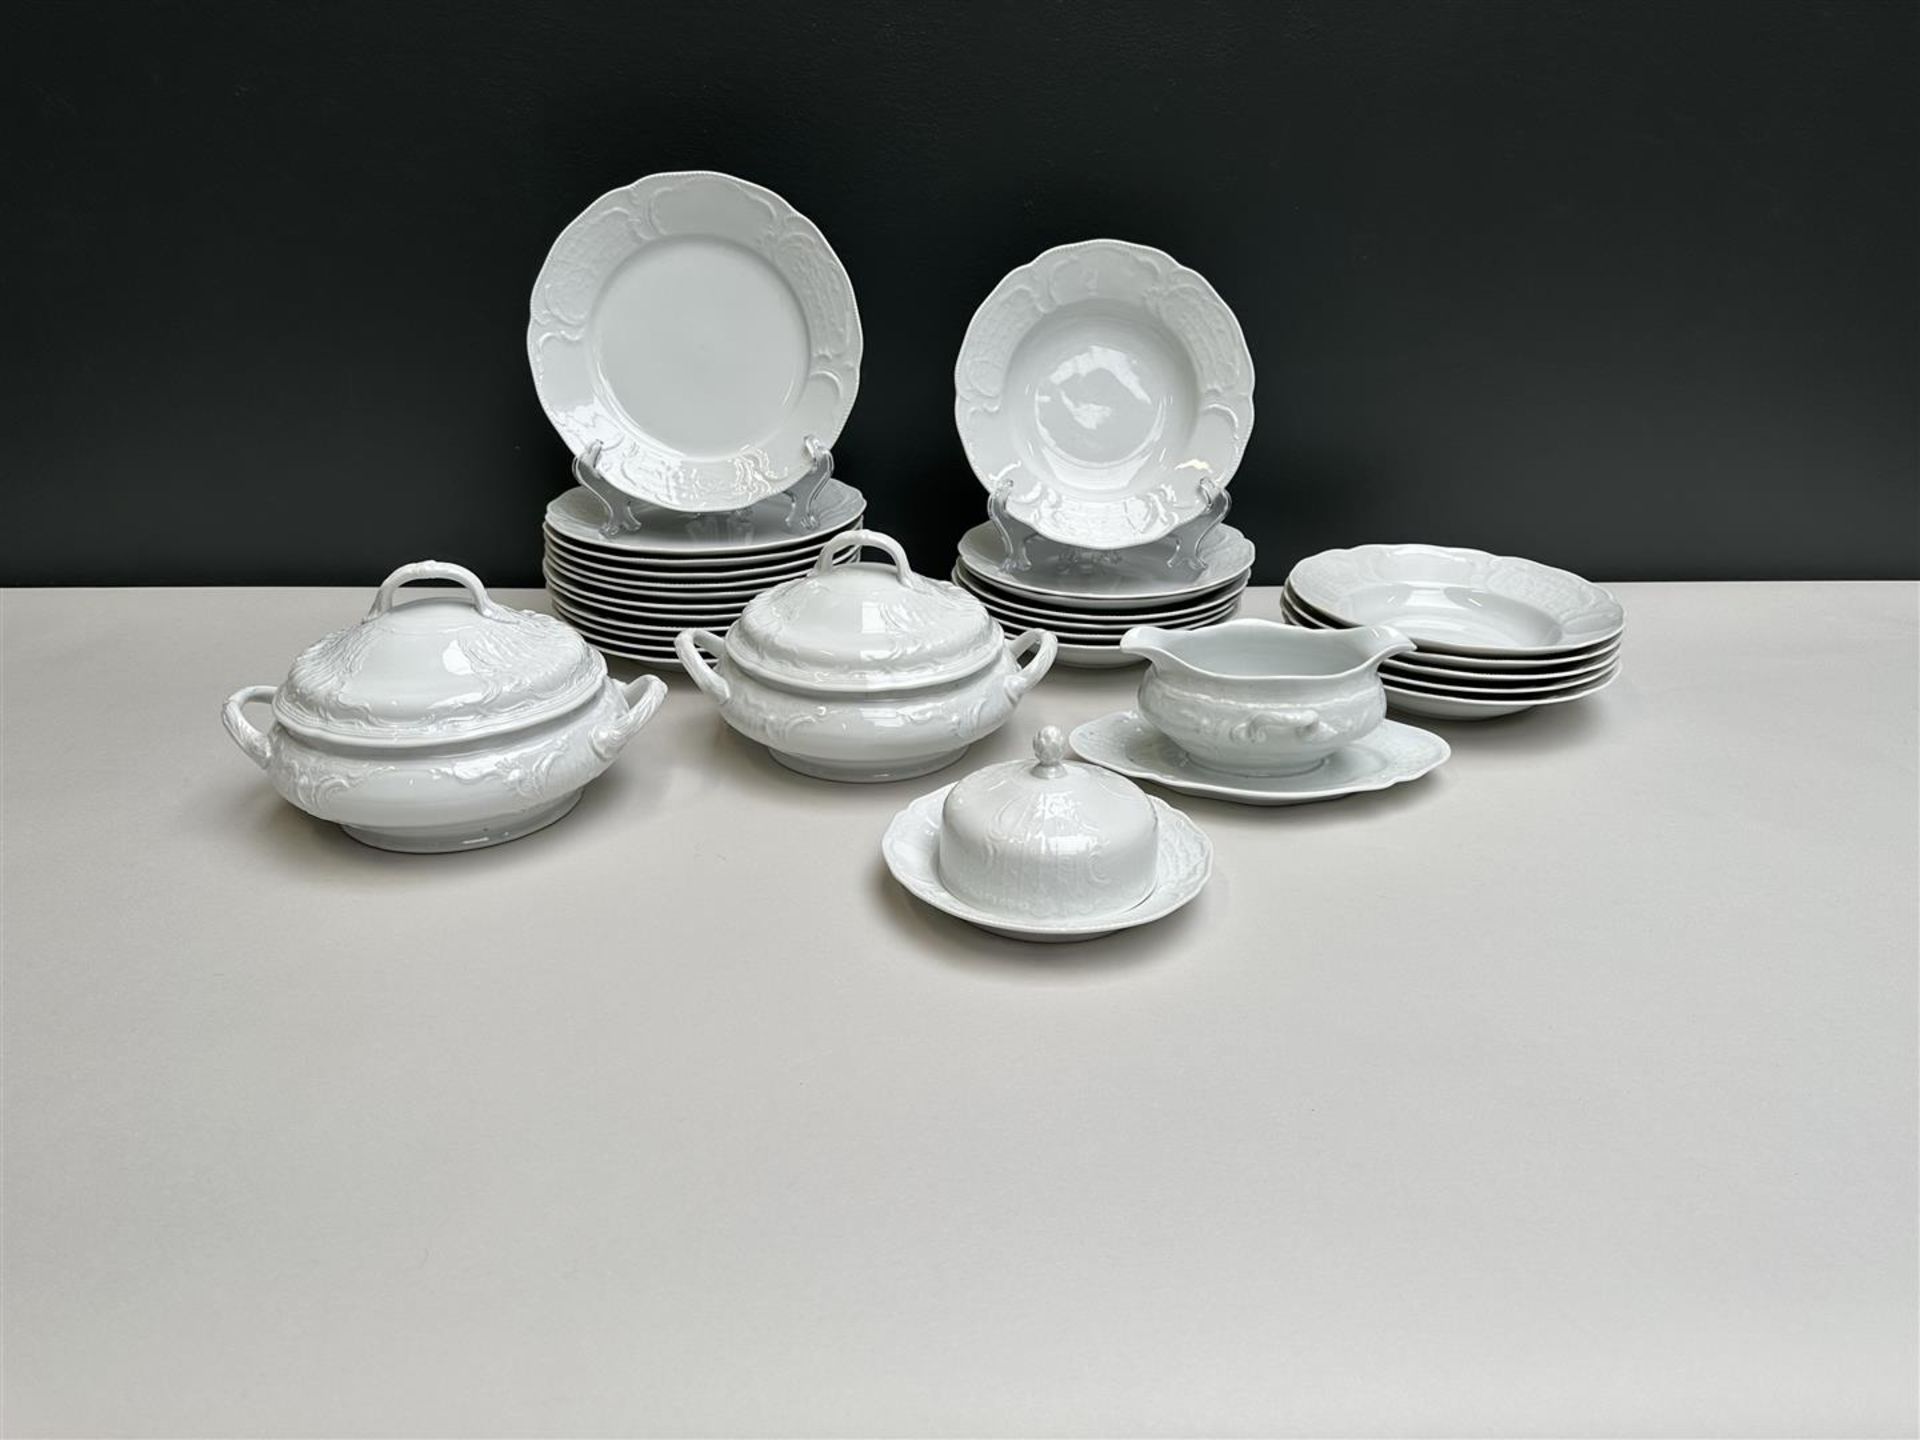 A Rosenthal Classic white 26-piece part service, 